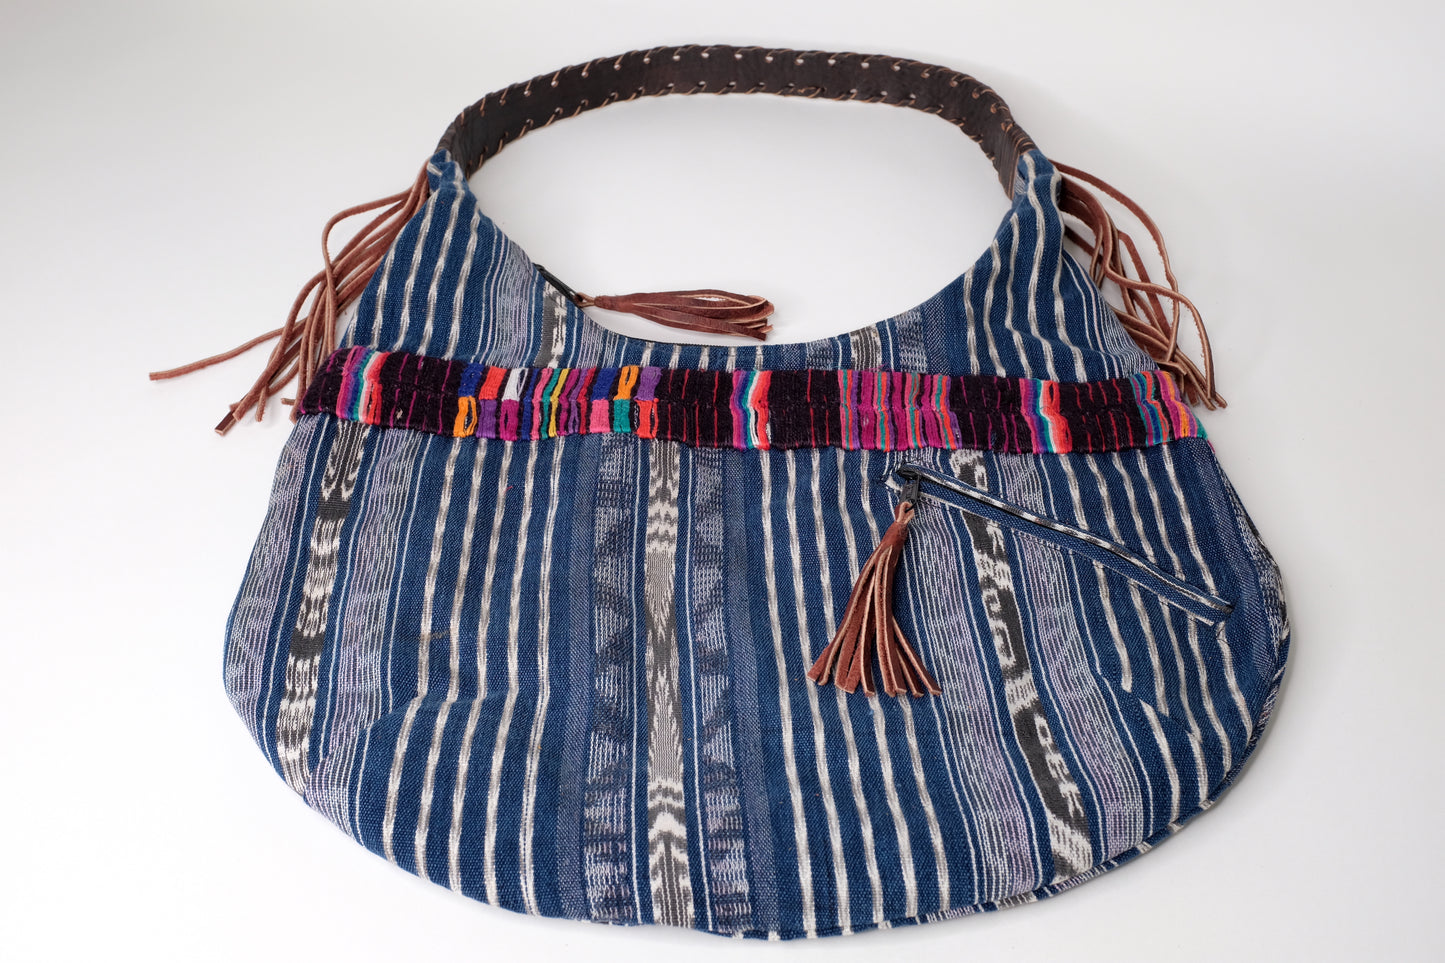 Blue handbag made with recycled Guatemala textiles, embroidery and leather fringe. Laying on a table.